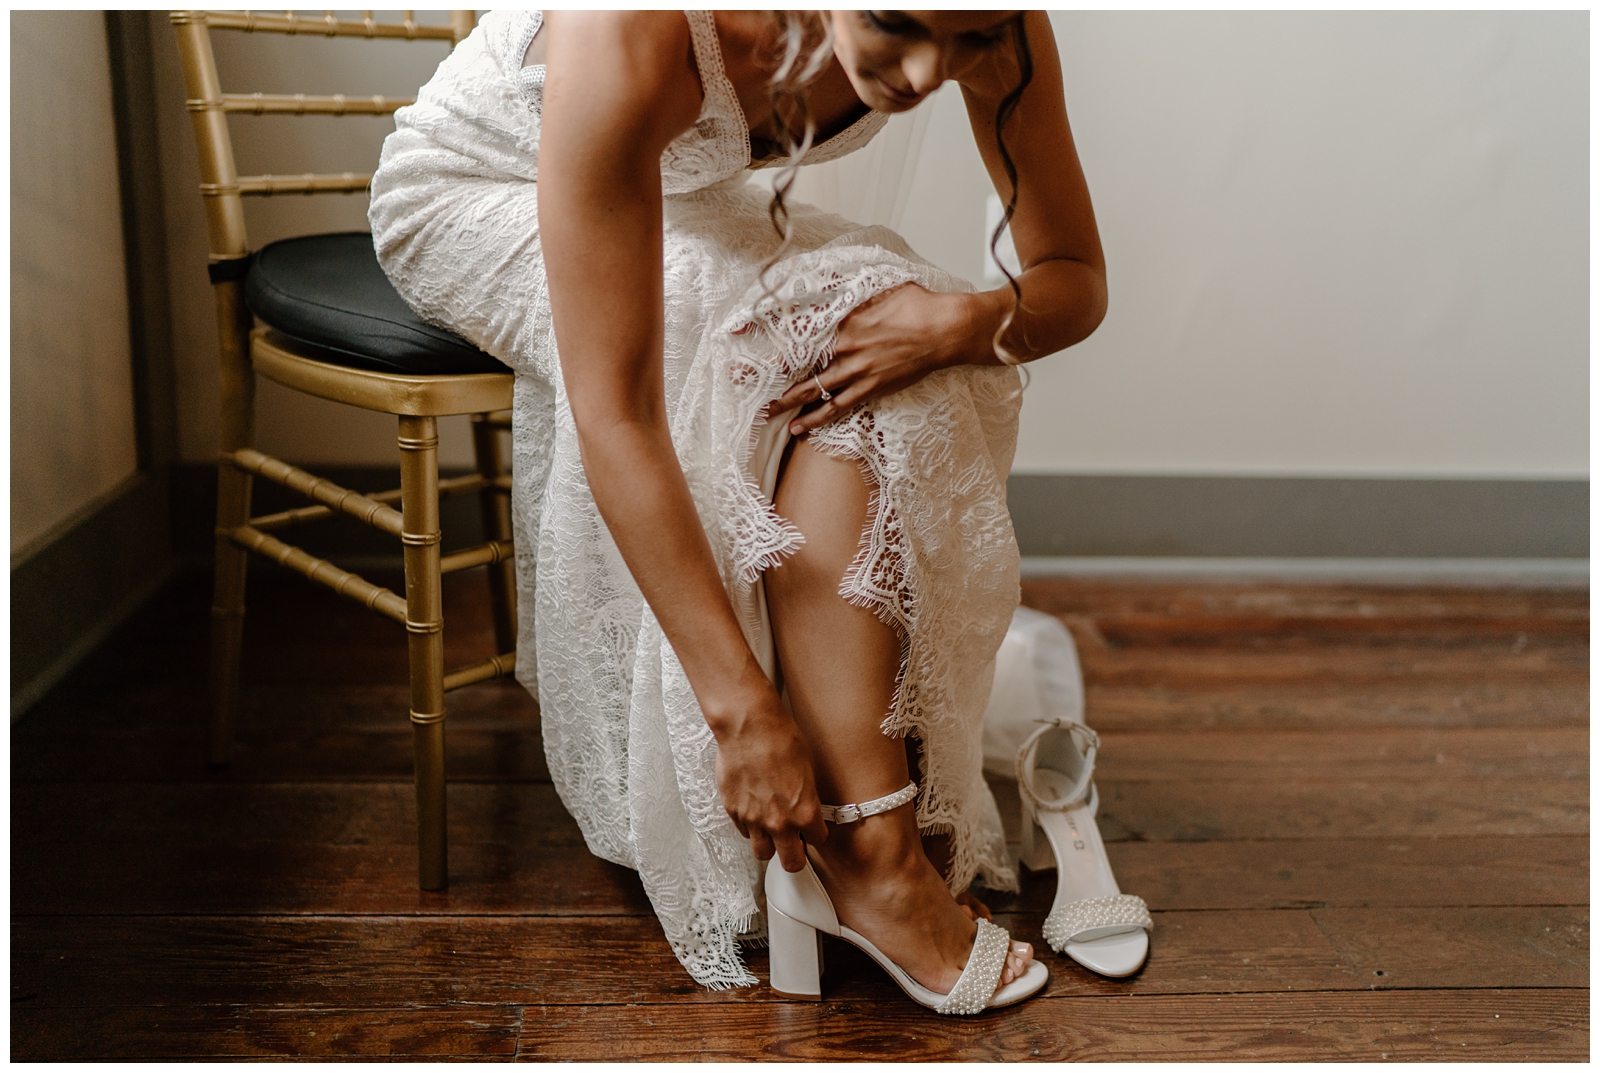 Bride getting ready portraits putting her shoes on, lace gown details